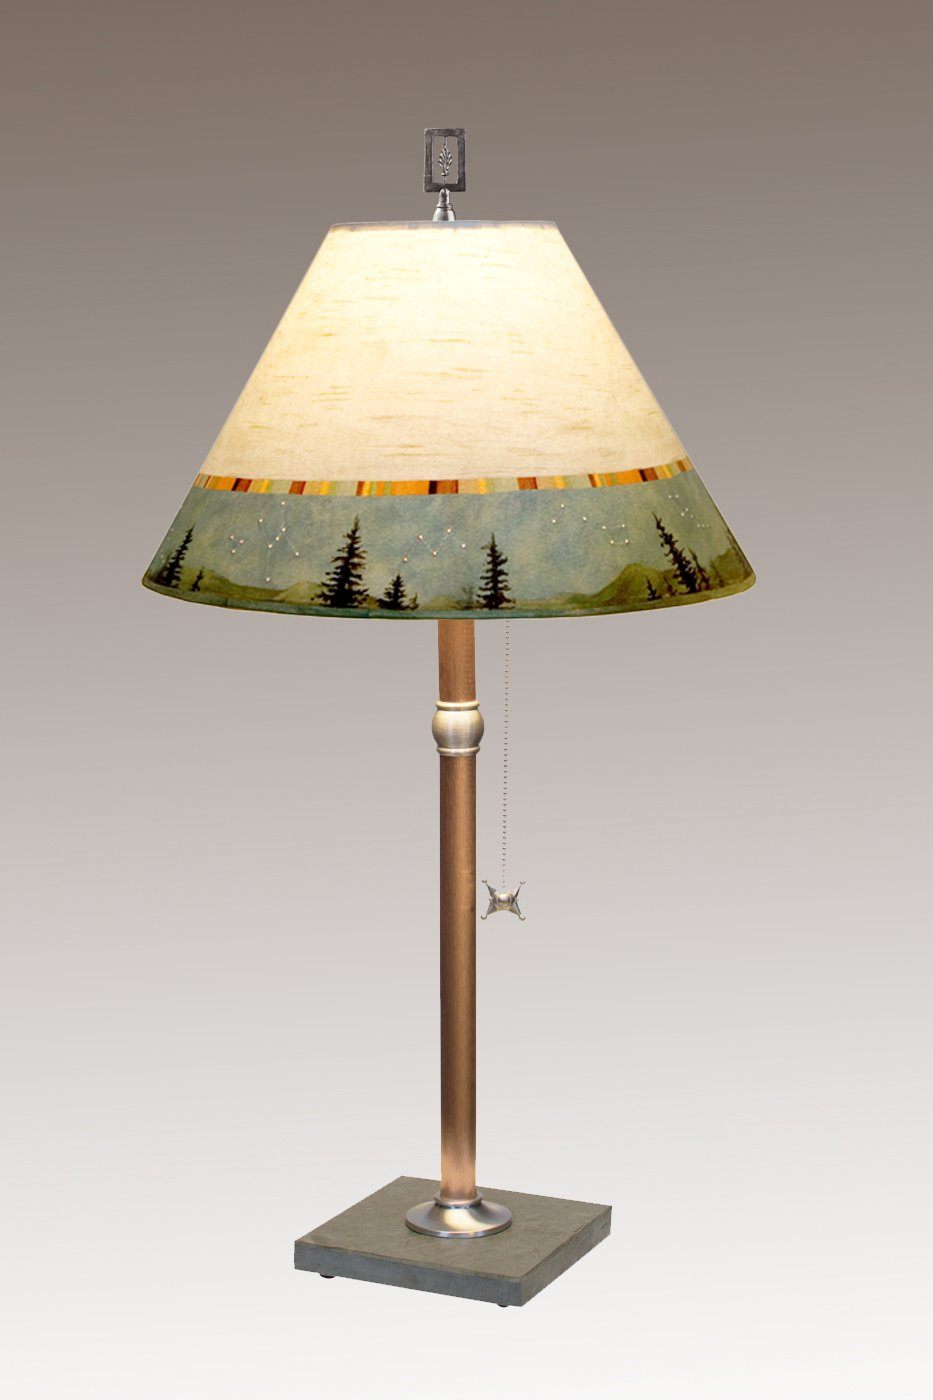 Copper Table Lamp with Medium Conical Shade in Birch Midnight